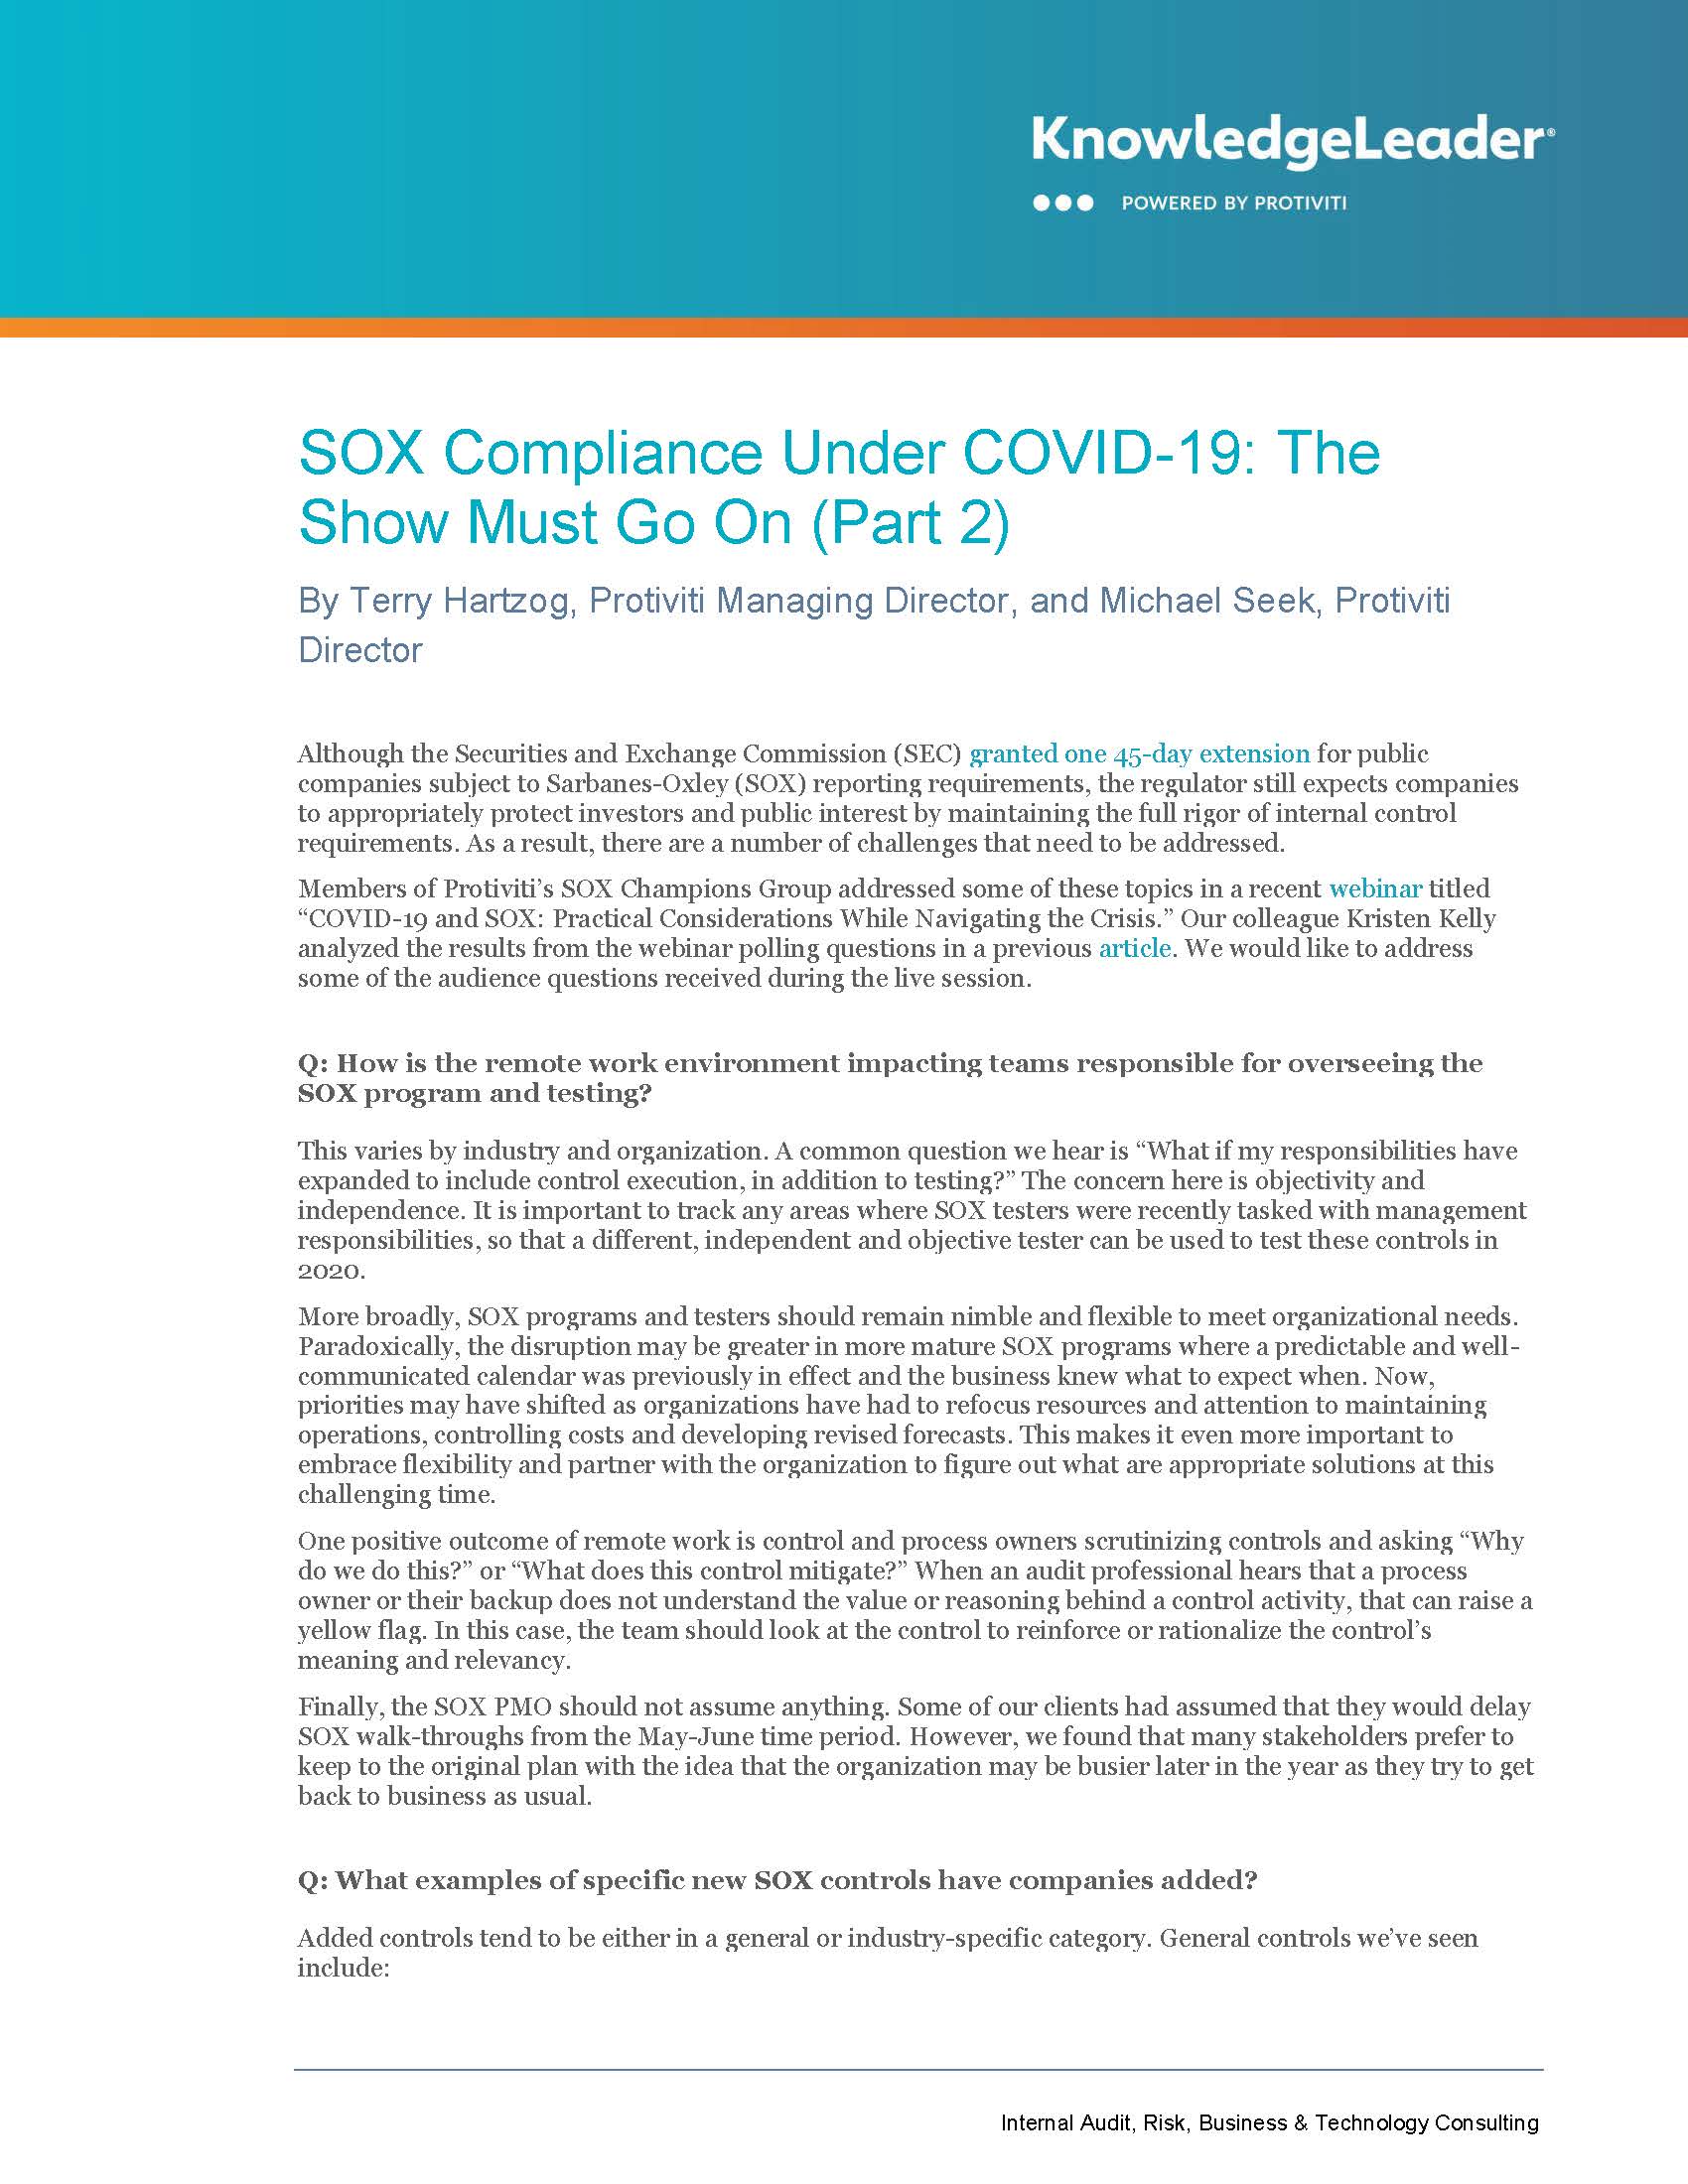 Screenshot of the first page of SOX Compliance Under COVID-19 The Show Must Go On (Part 2)